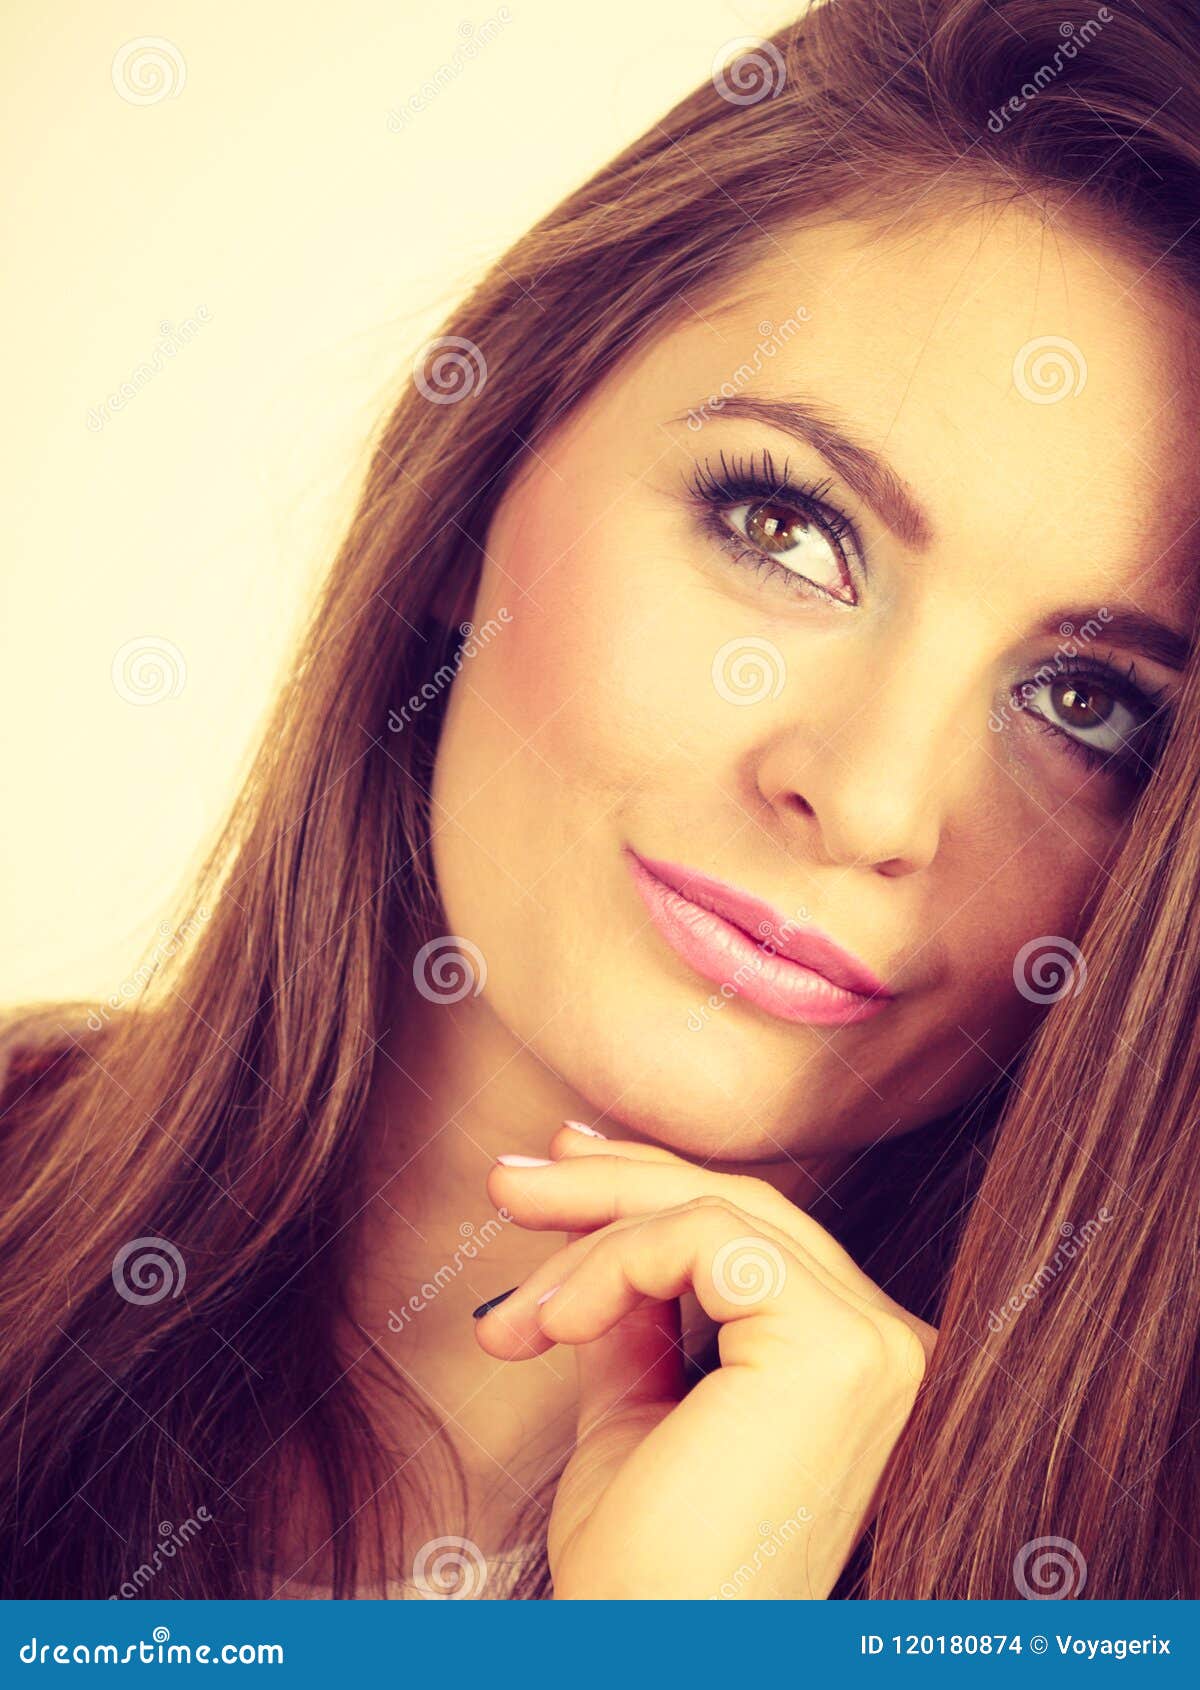 Portrait of Happy, Positive Attractive Woman Stock Photo - Image of ...